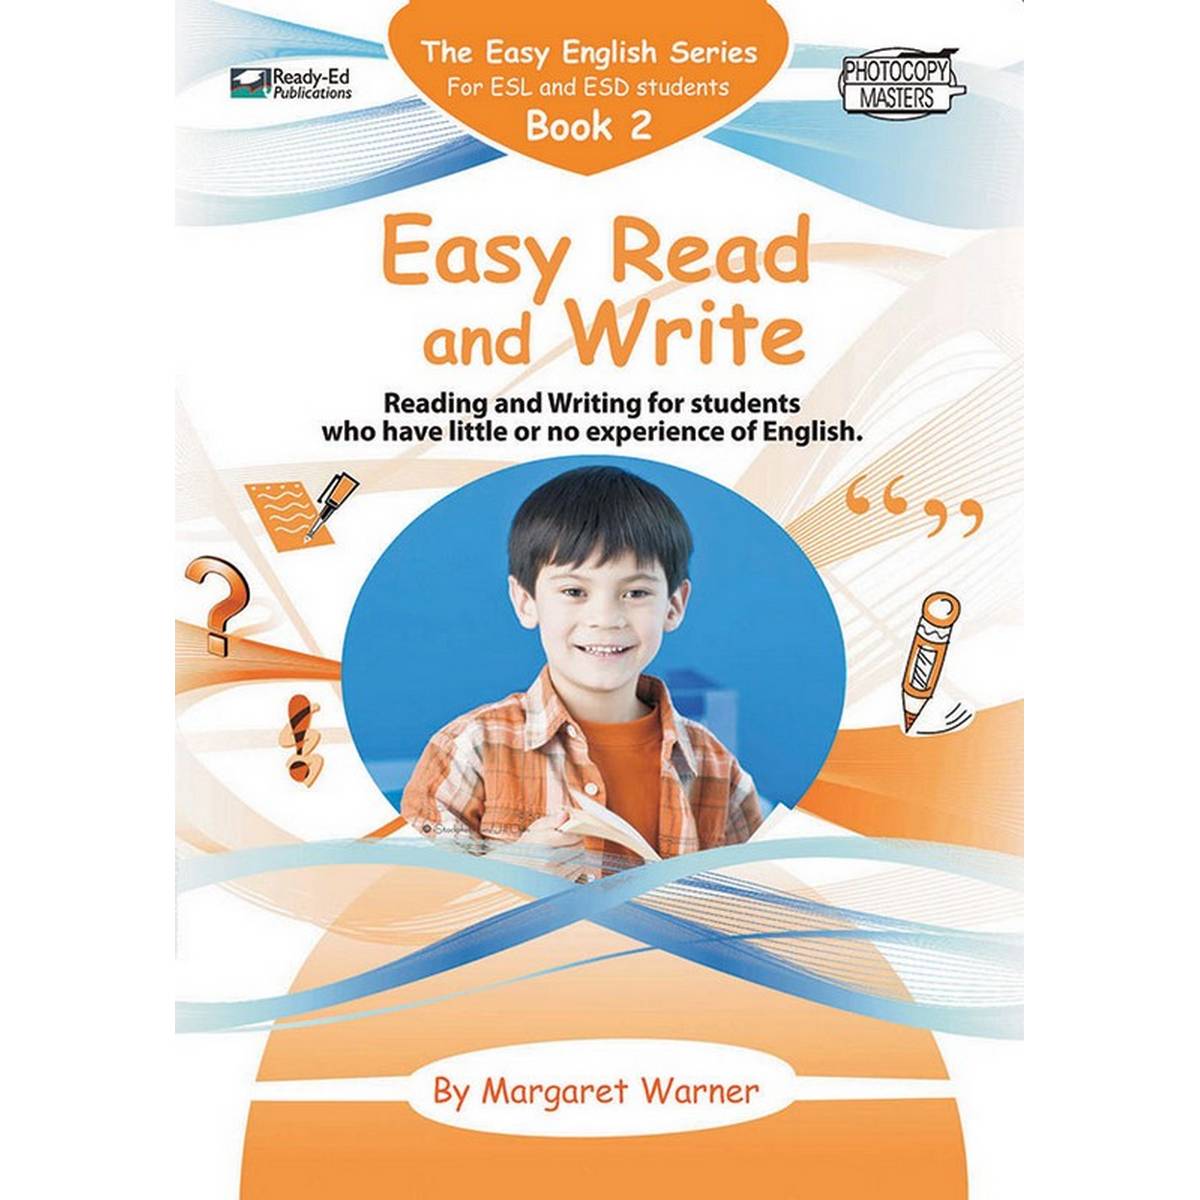 Easy English Series Book 2 Easy Read and Write